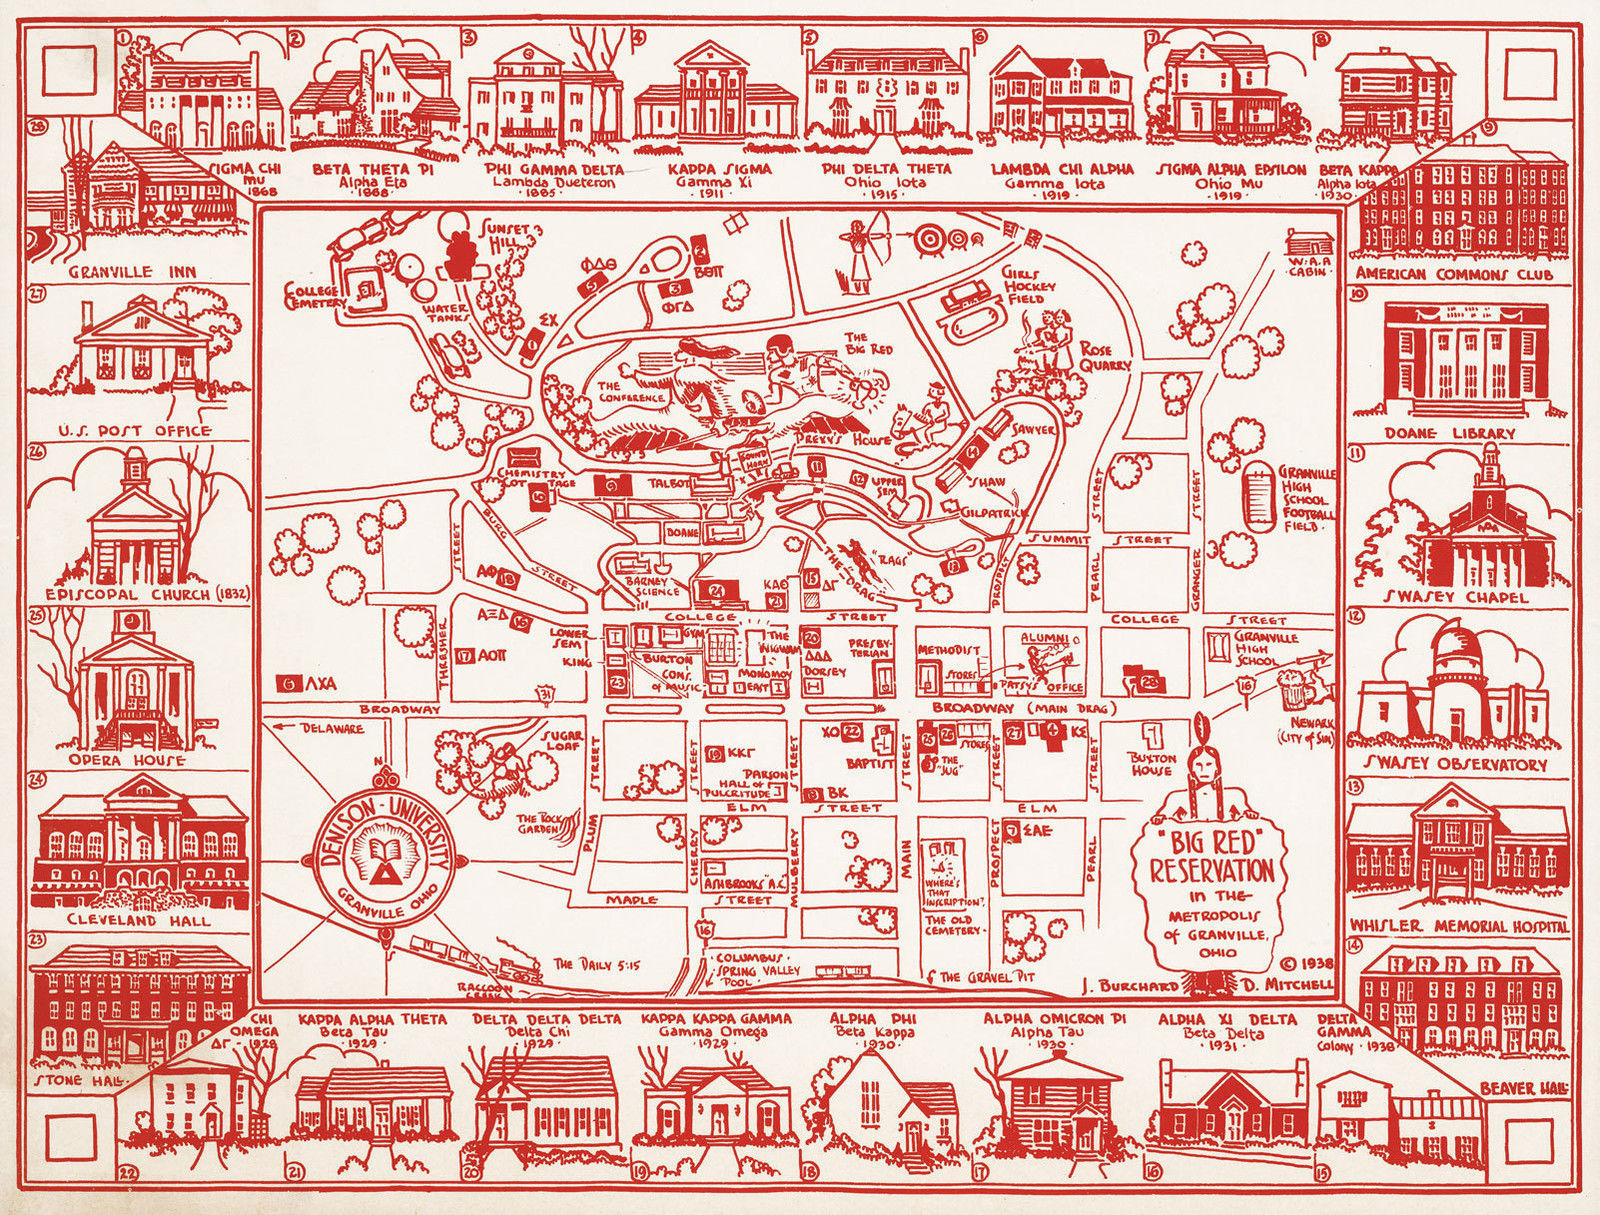 1932 Pictorial Map Princeton University Campus Buildings Streets Poster Print